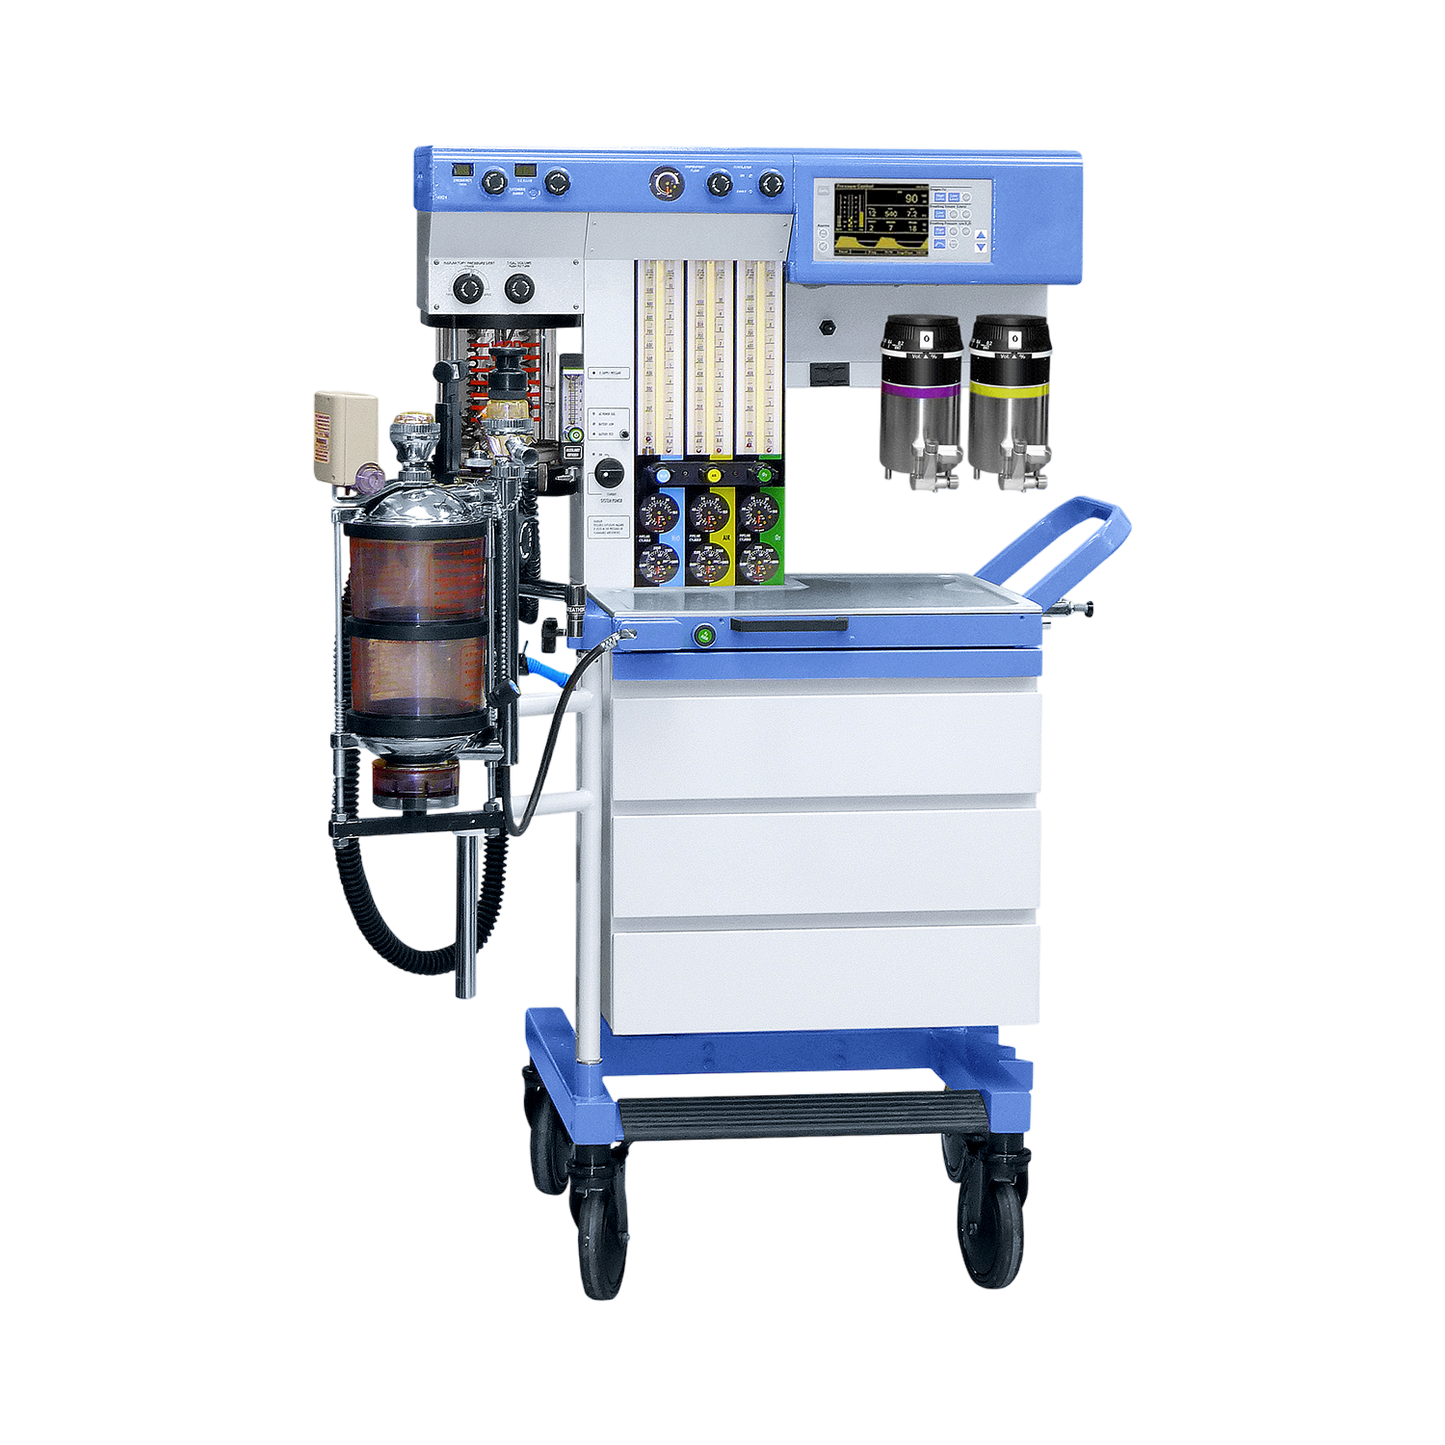 Drager/Siemens Narkomed GS Anesthesia Machine